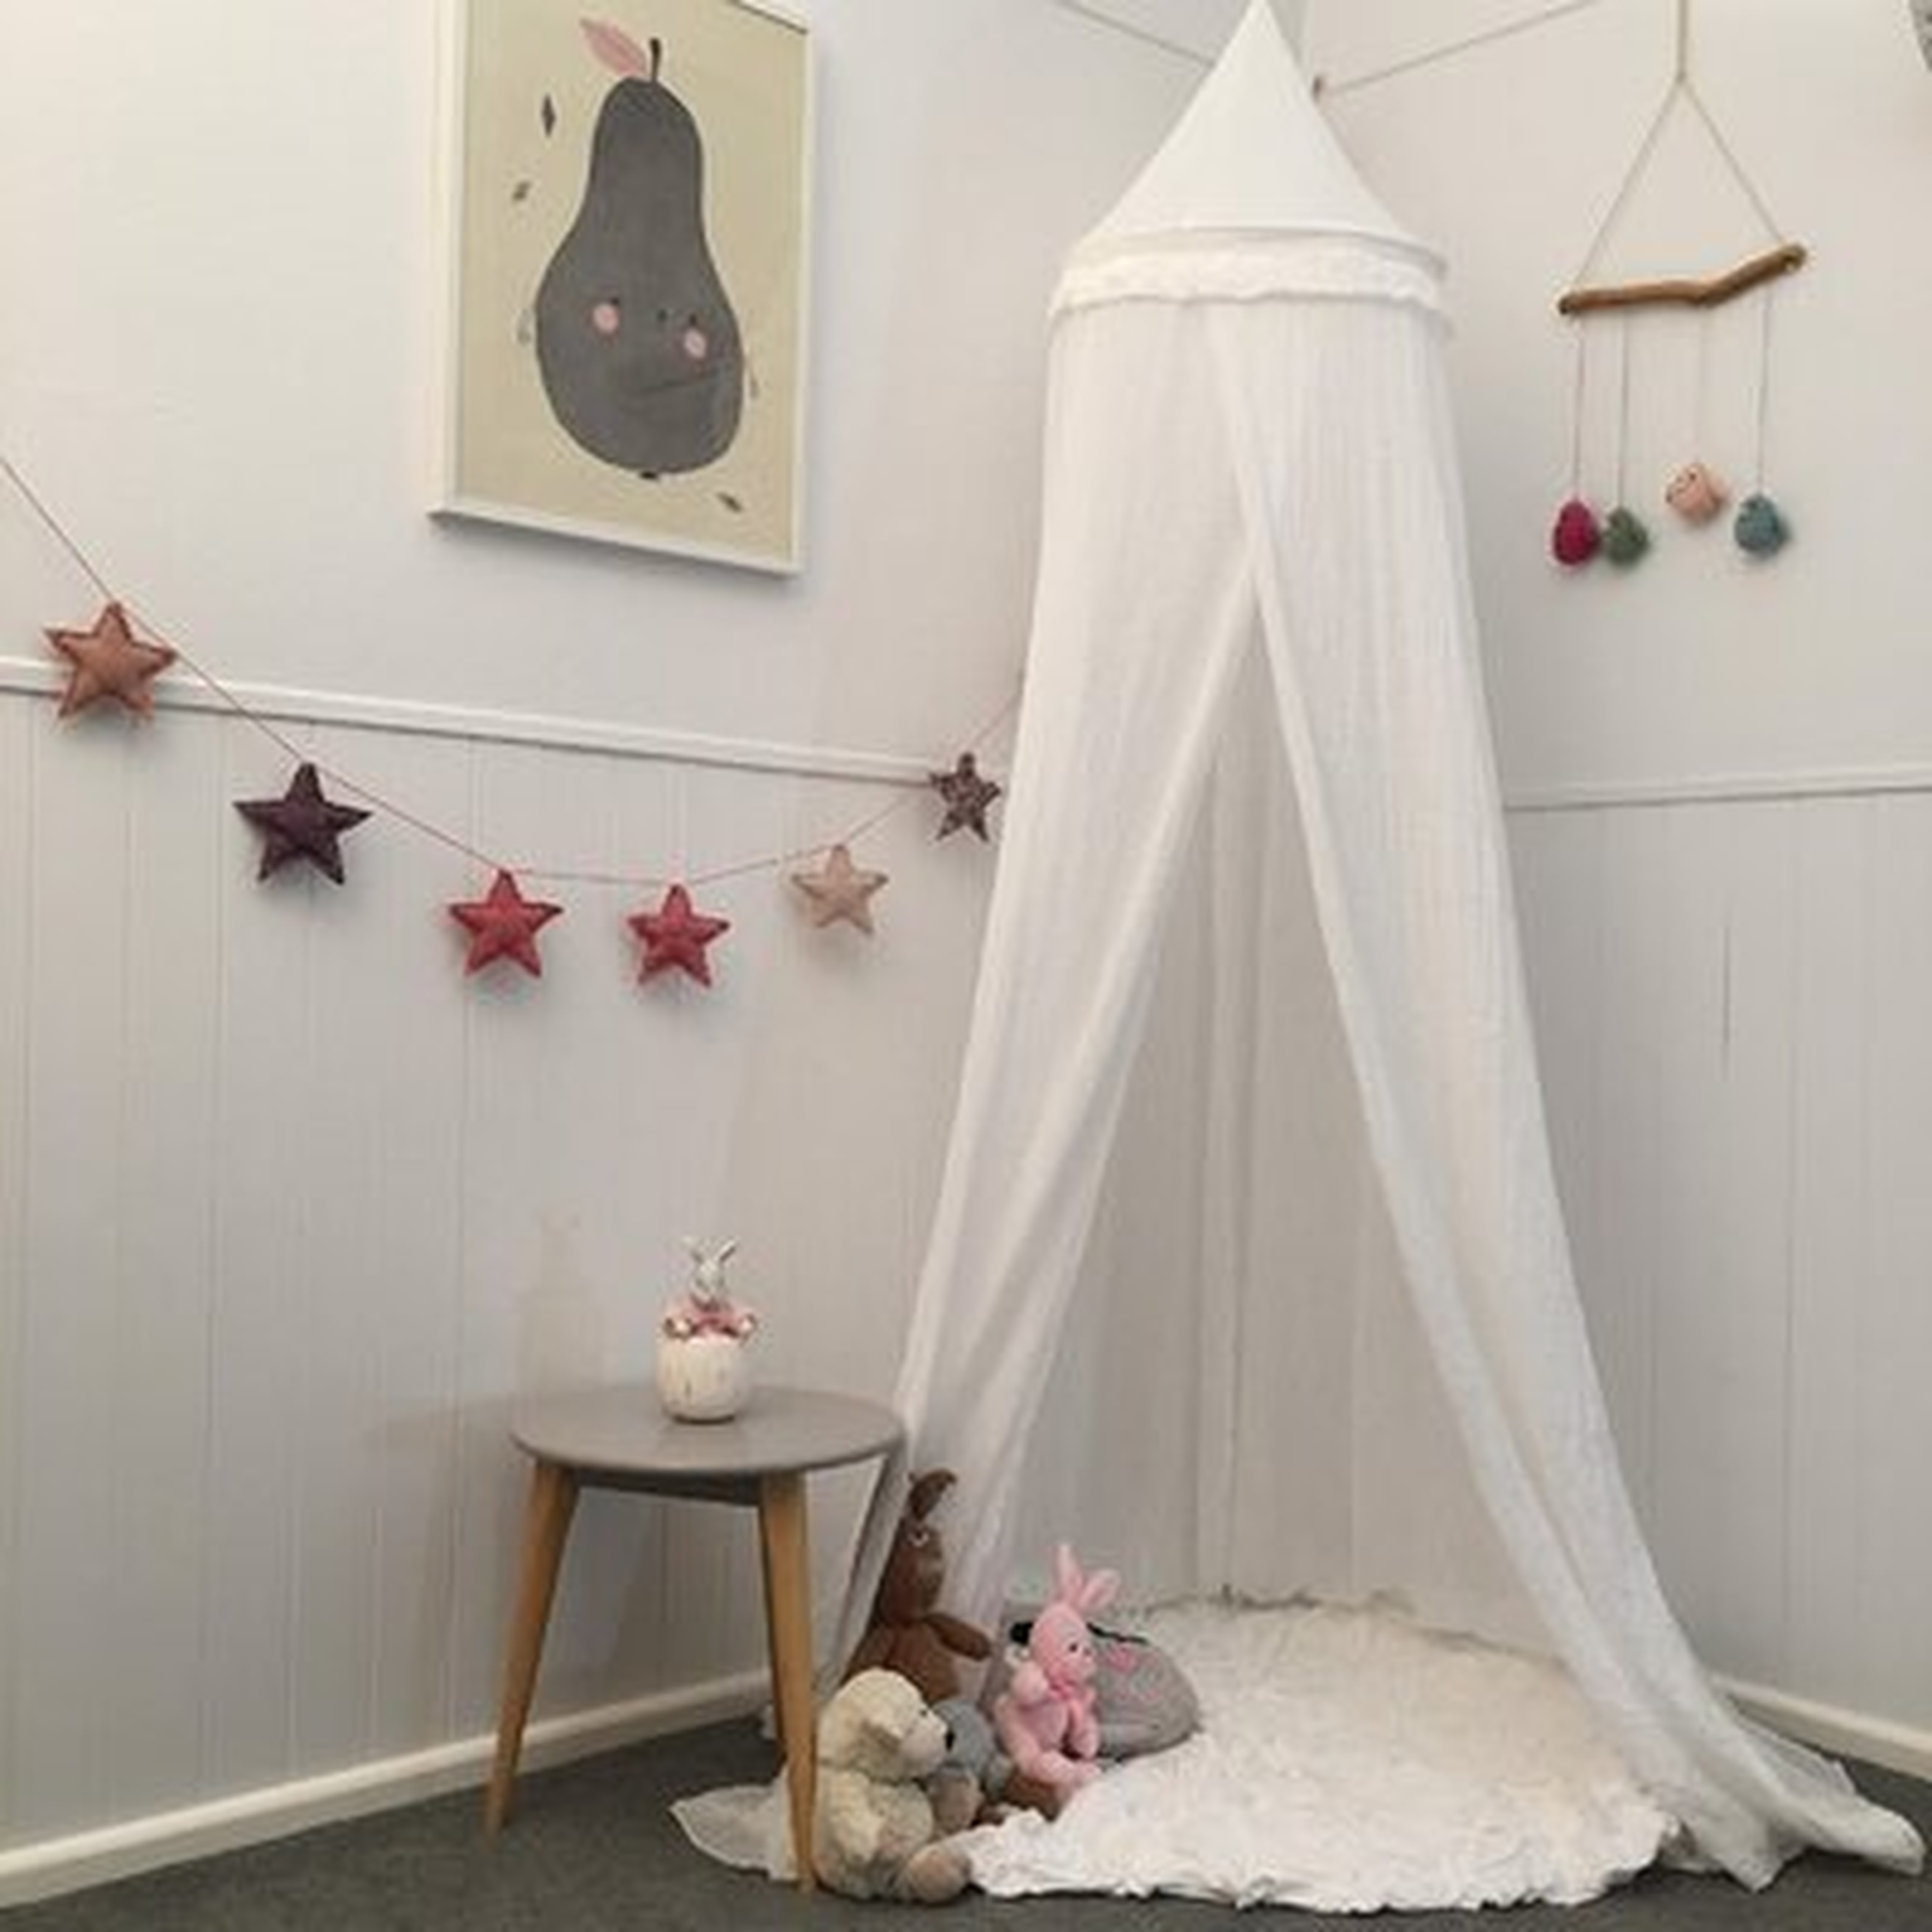 Soft White Hanging Bed Canopy For Girls Bed Or Boys – Hideaway Tent For Kids Rooms With Tassels – For Child, Play Or Reading Nook - Wayfair